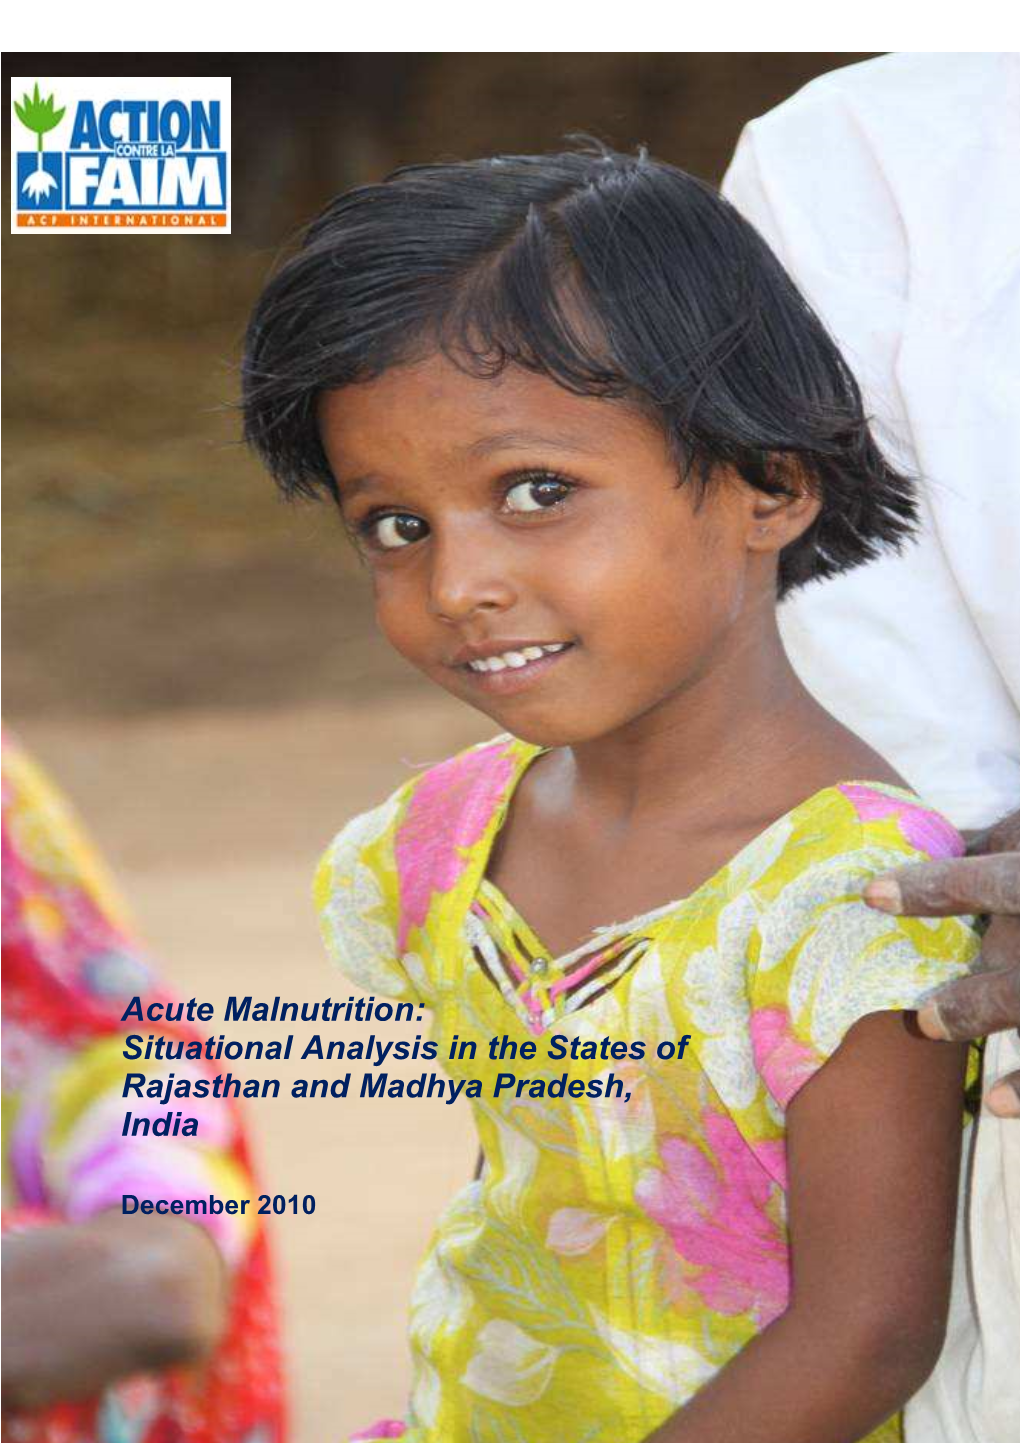 Acute Malnutrition: Situational Analysis in the States of Rajasthan and Madhya Pradesh, India